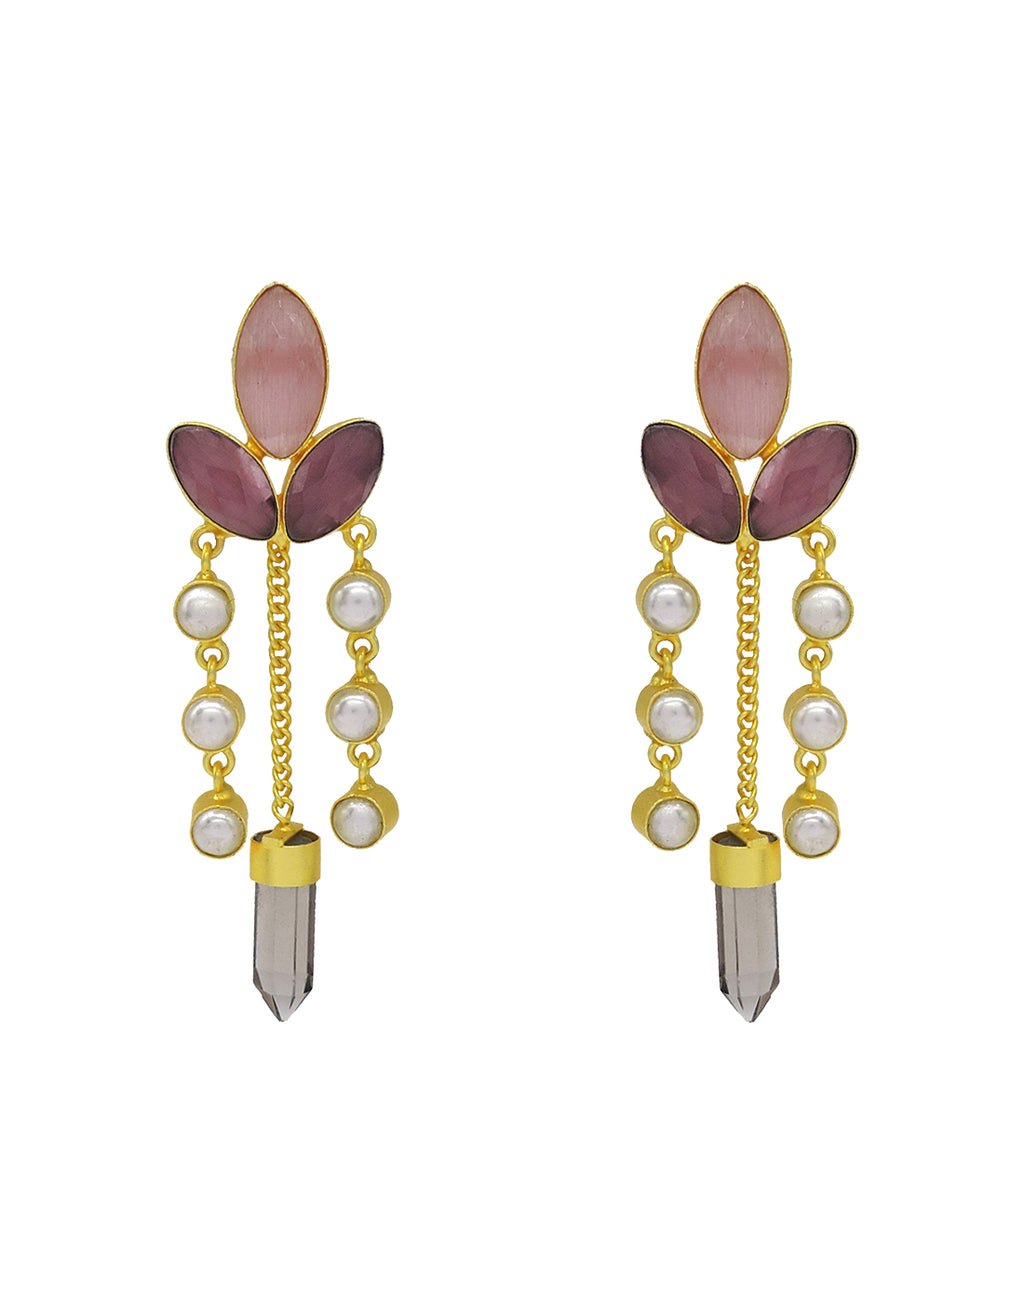 Floral Trail Earrings - Statement Earrings - Gold-Plated & Hypoallergenic - Made in India - Dubai Jewellery - Dori